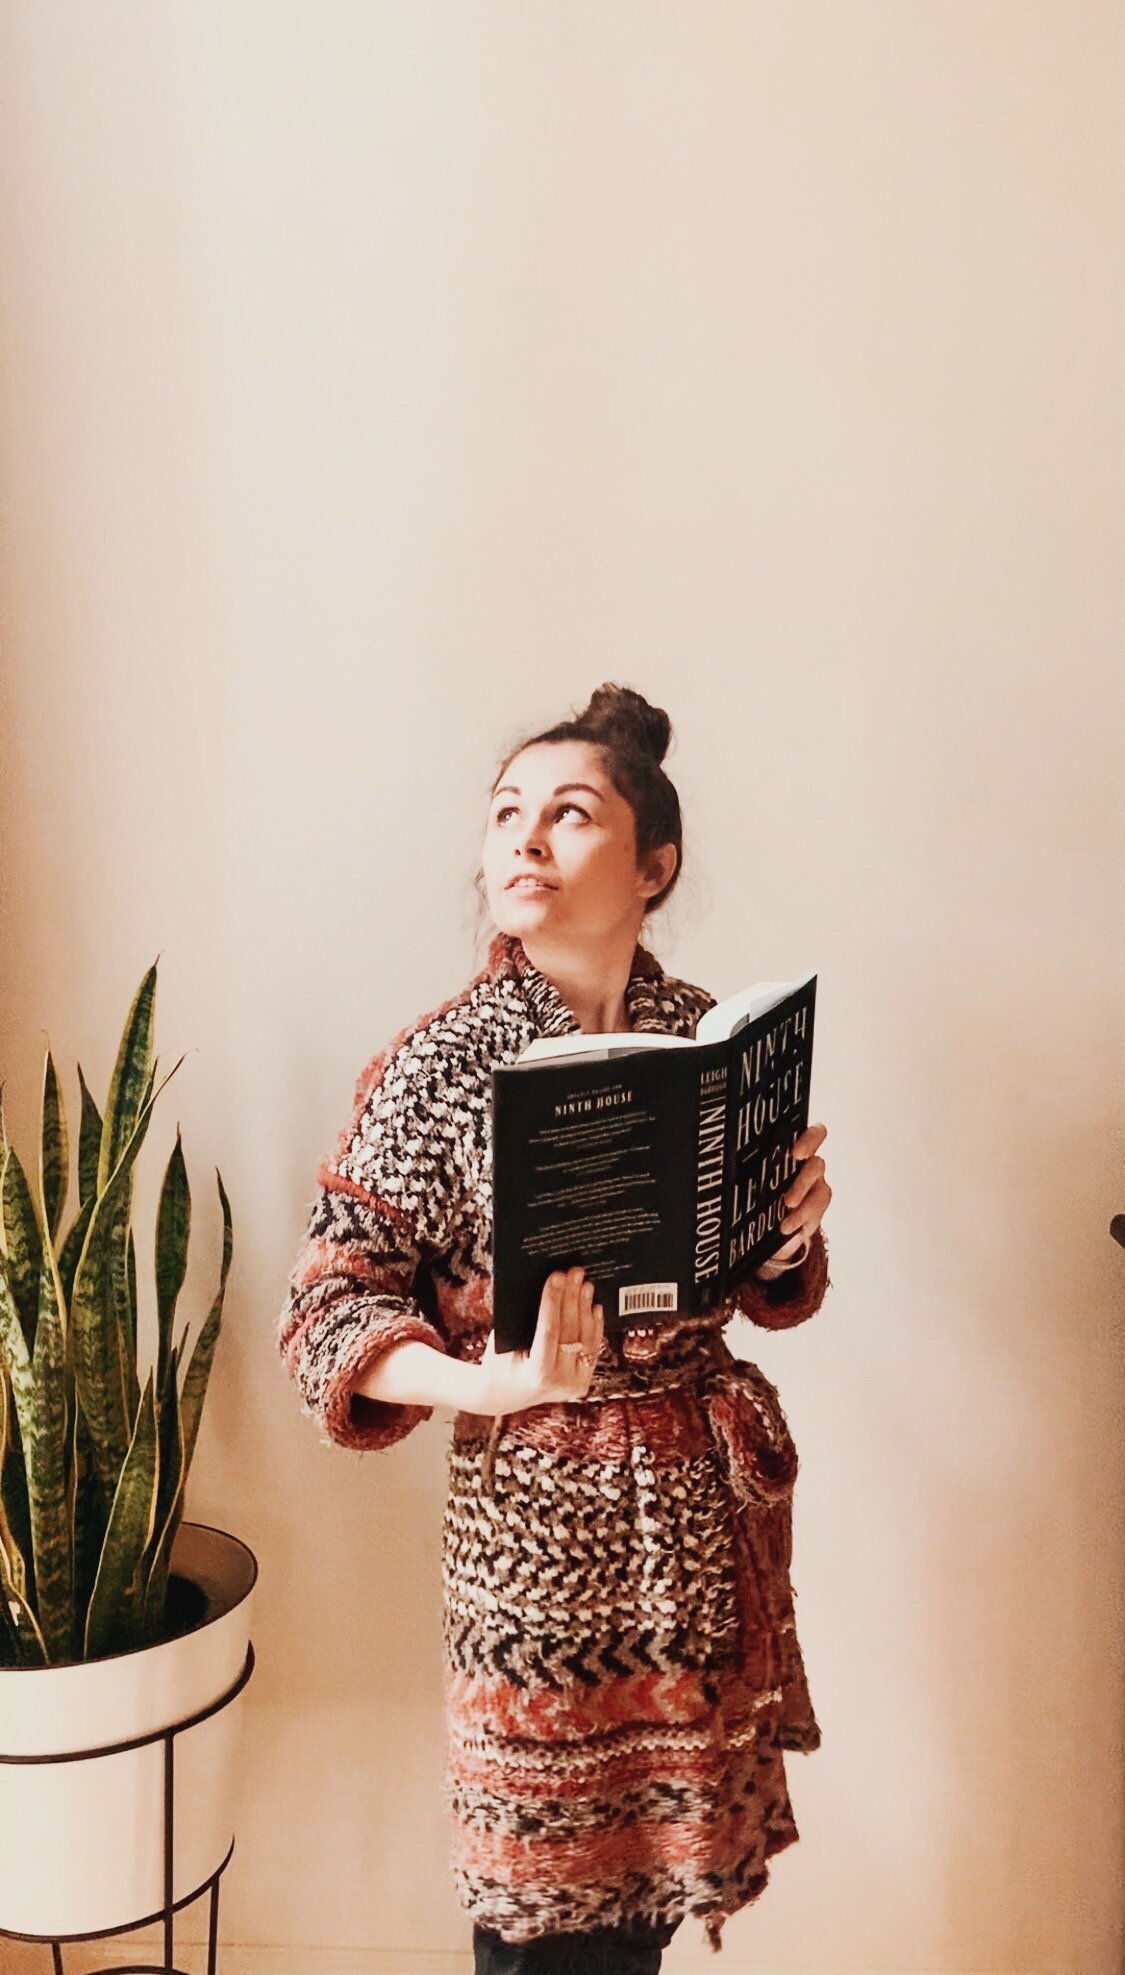 Grace stands in a red sweater holding the book Ninth House by Leigh Bardugo while looking off through the window.